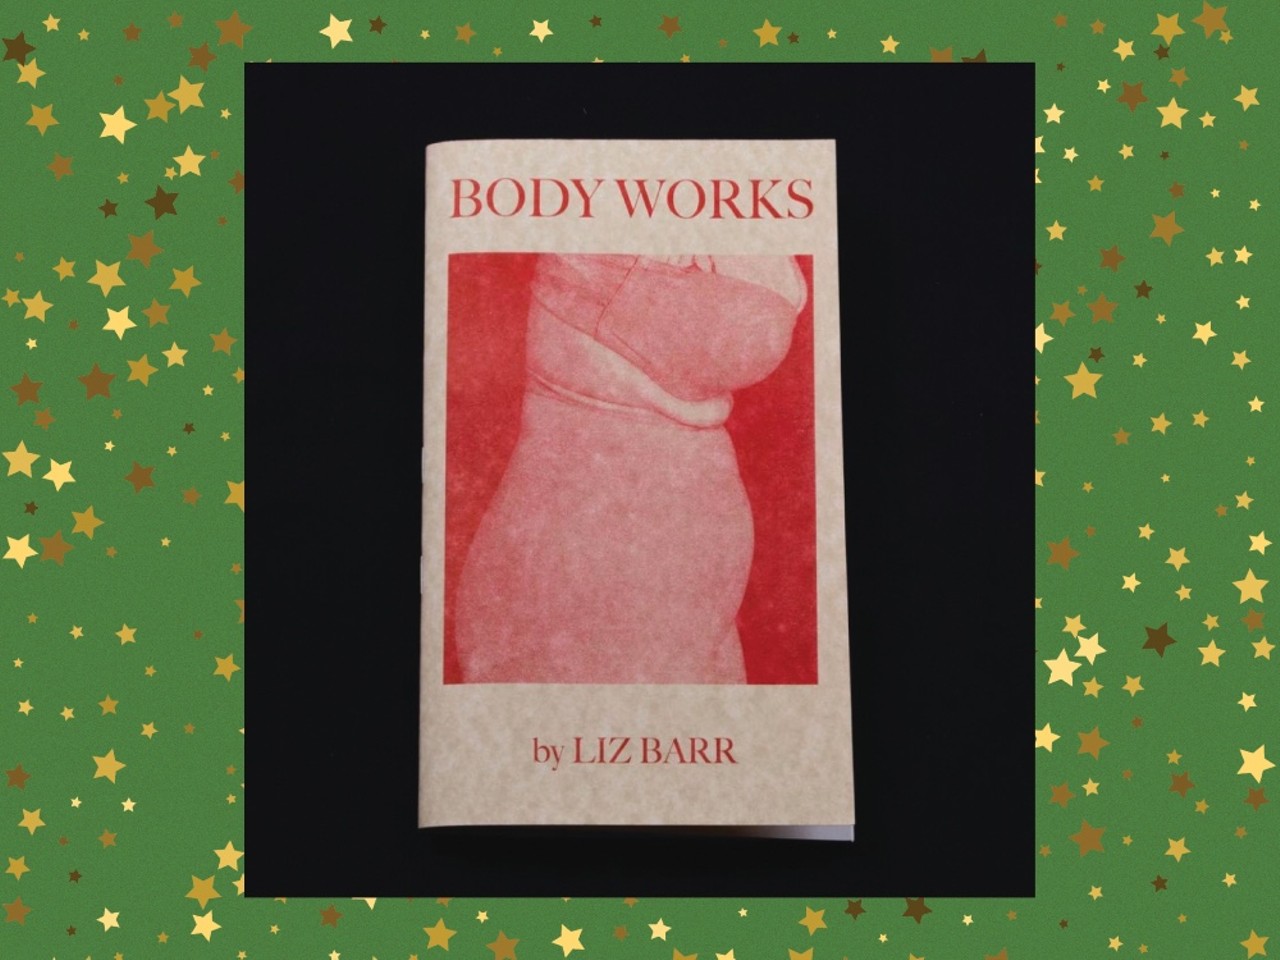 Body Works by Liz Barr from Know How Bookshop: $16
(2701 Cherokee Street, knowhowbookshop.com) 
If you're looking for a gift to give to someone involved in the body positivity movement, Liz Barr takes a deep dive into reflective questions to ask yourself the next time you question your body. 
Photo credit: Know How Bookshop